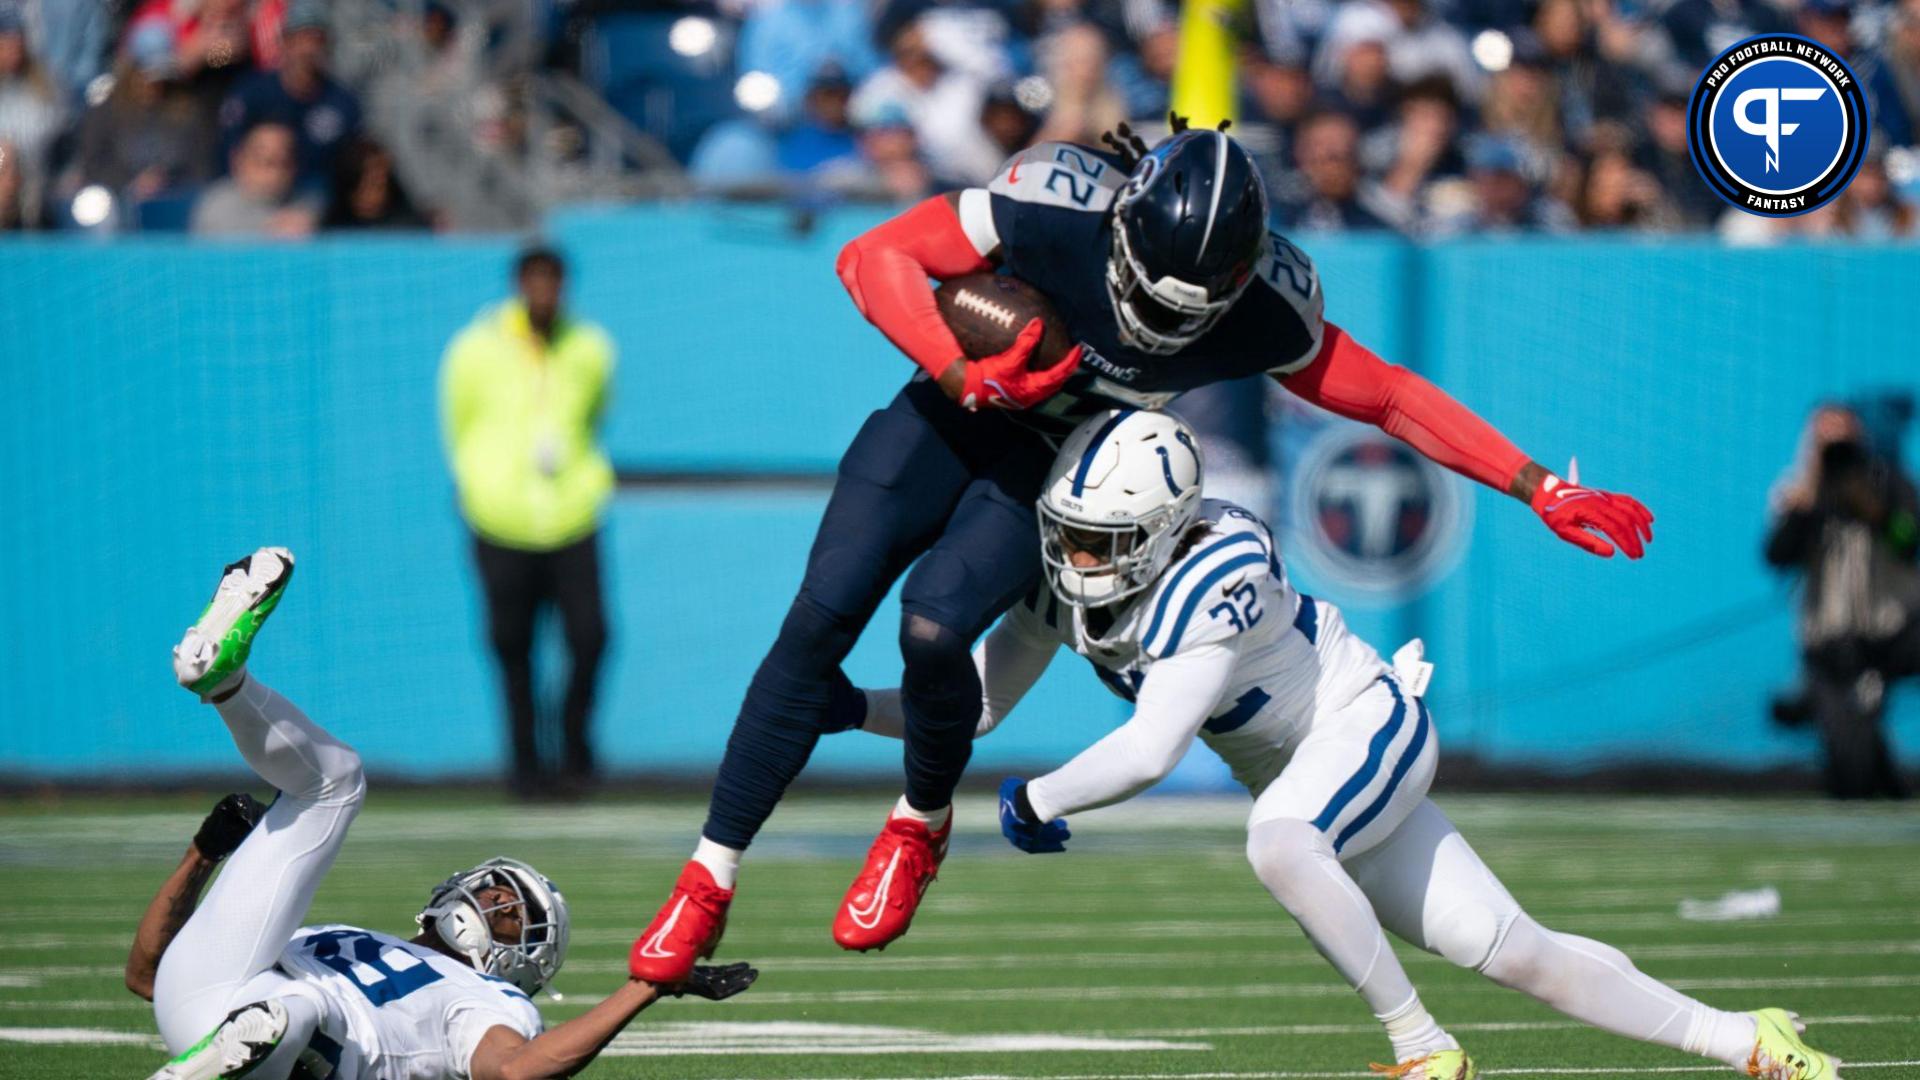 Indianapolis Colts safety Julian Blackmon (32) tackles Tennessee Titans running back Derrick Henry (22) after he gained a first down during their game at Nissan Stadium.